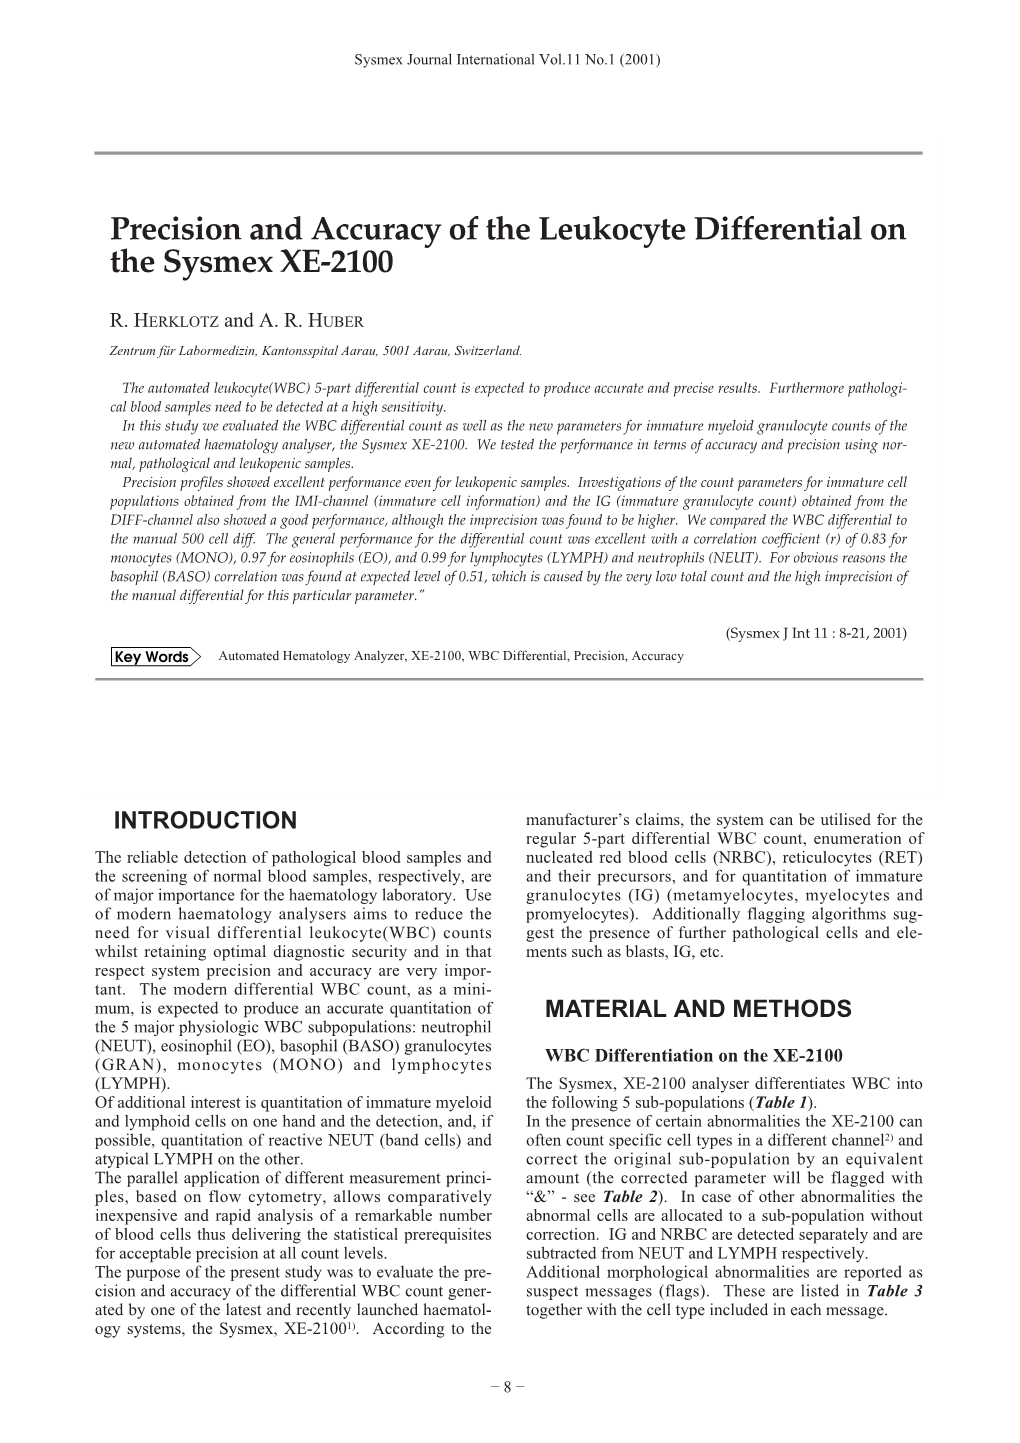 Precision and Accuracy of the Leukocyte Differential on the Sysmex XE-2100